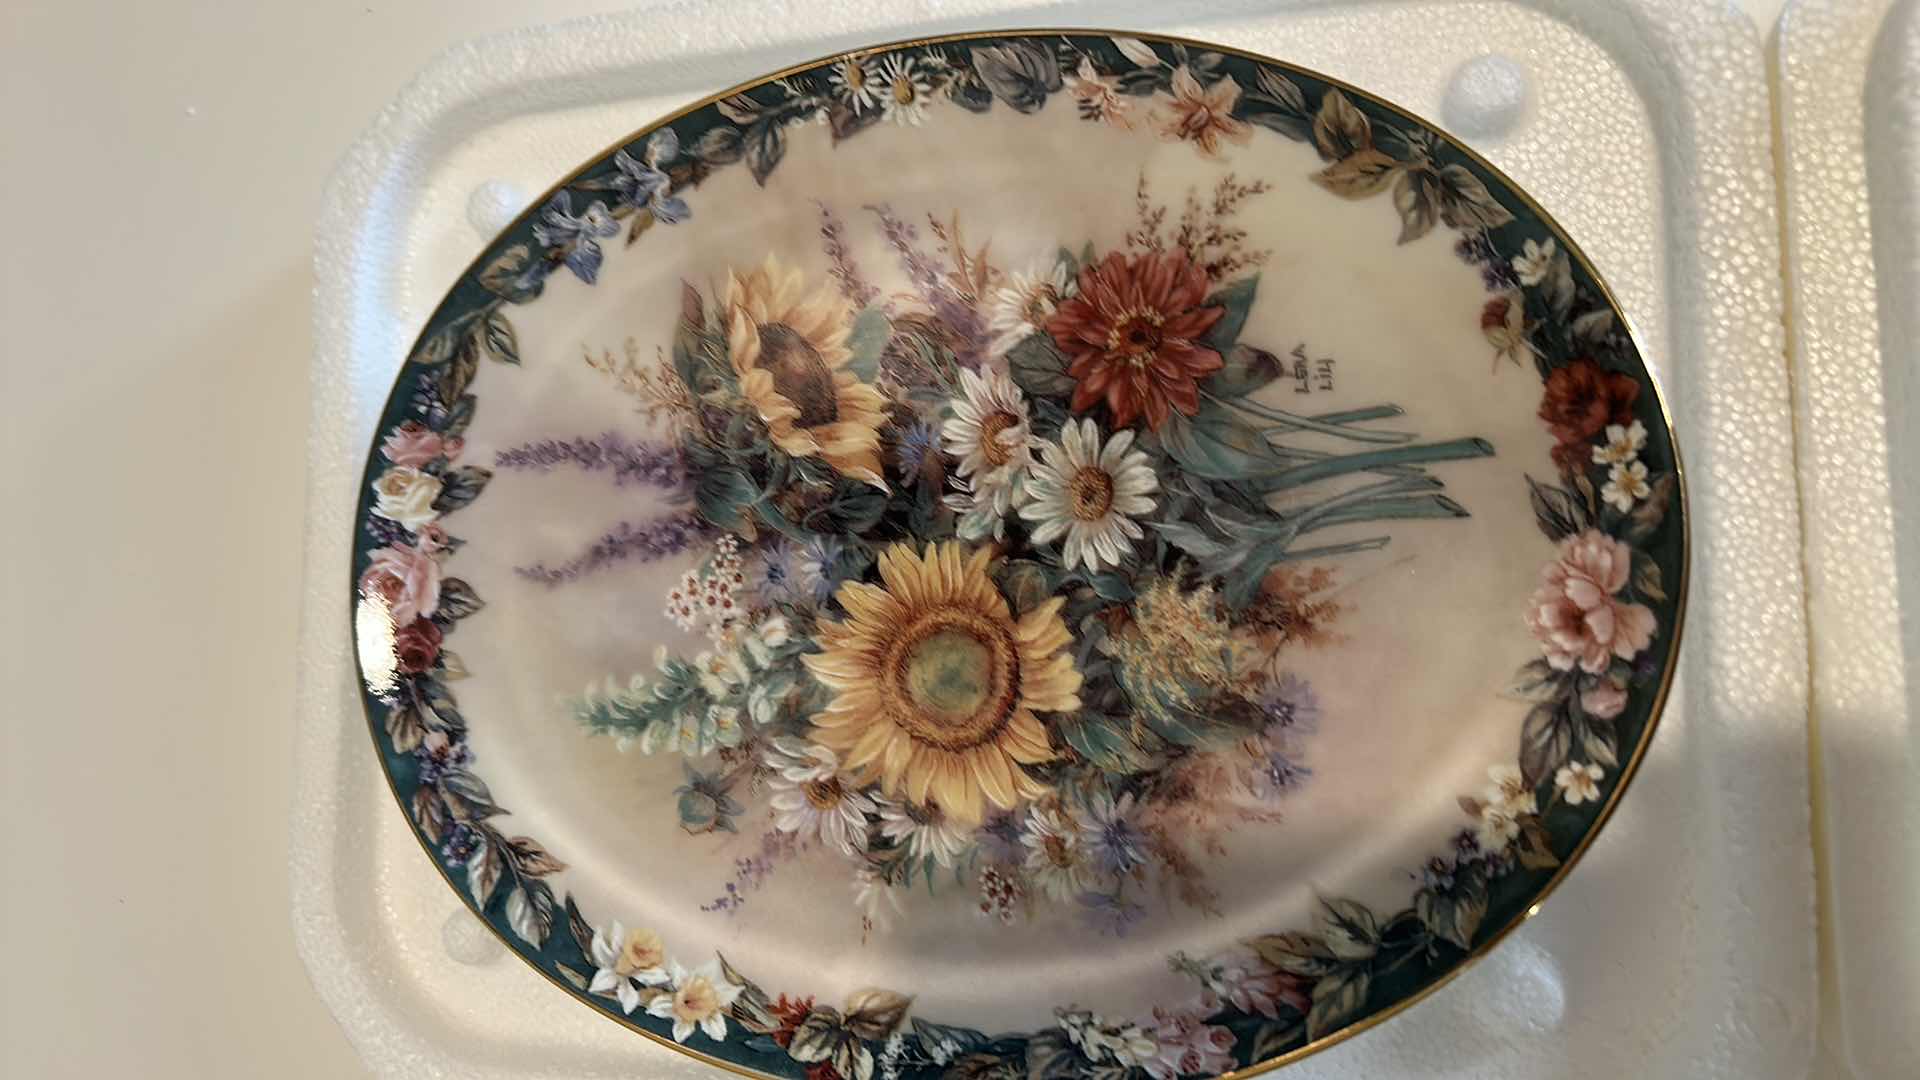 Photo 2 of AUTHENTIC ORIGINAL LIMITED EDITION “RADIANCE” BY LENA LIU PORCELAIN PLATE 6 1/2” x 8 3/4”